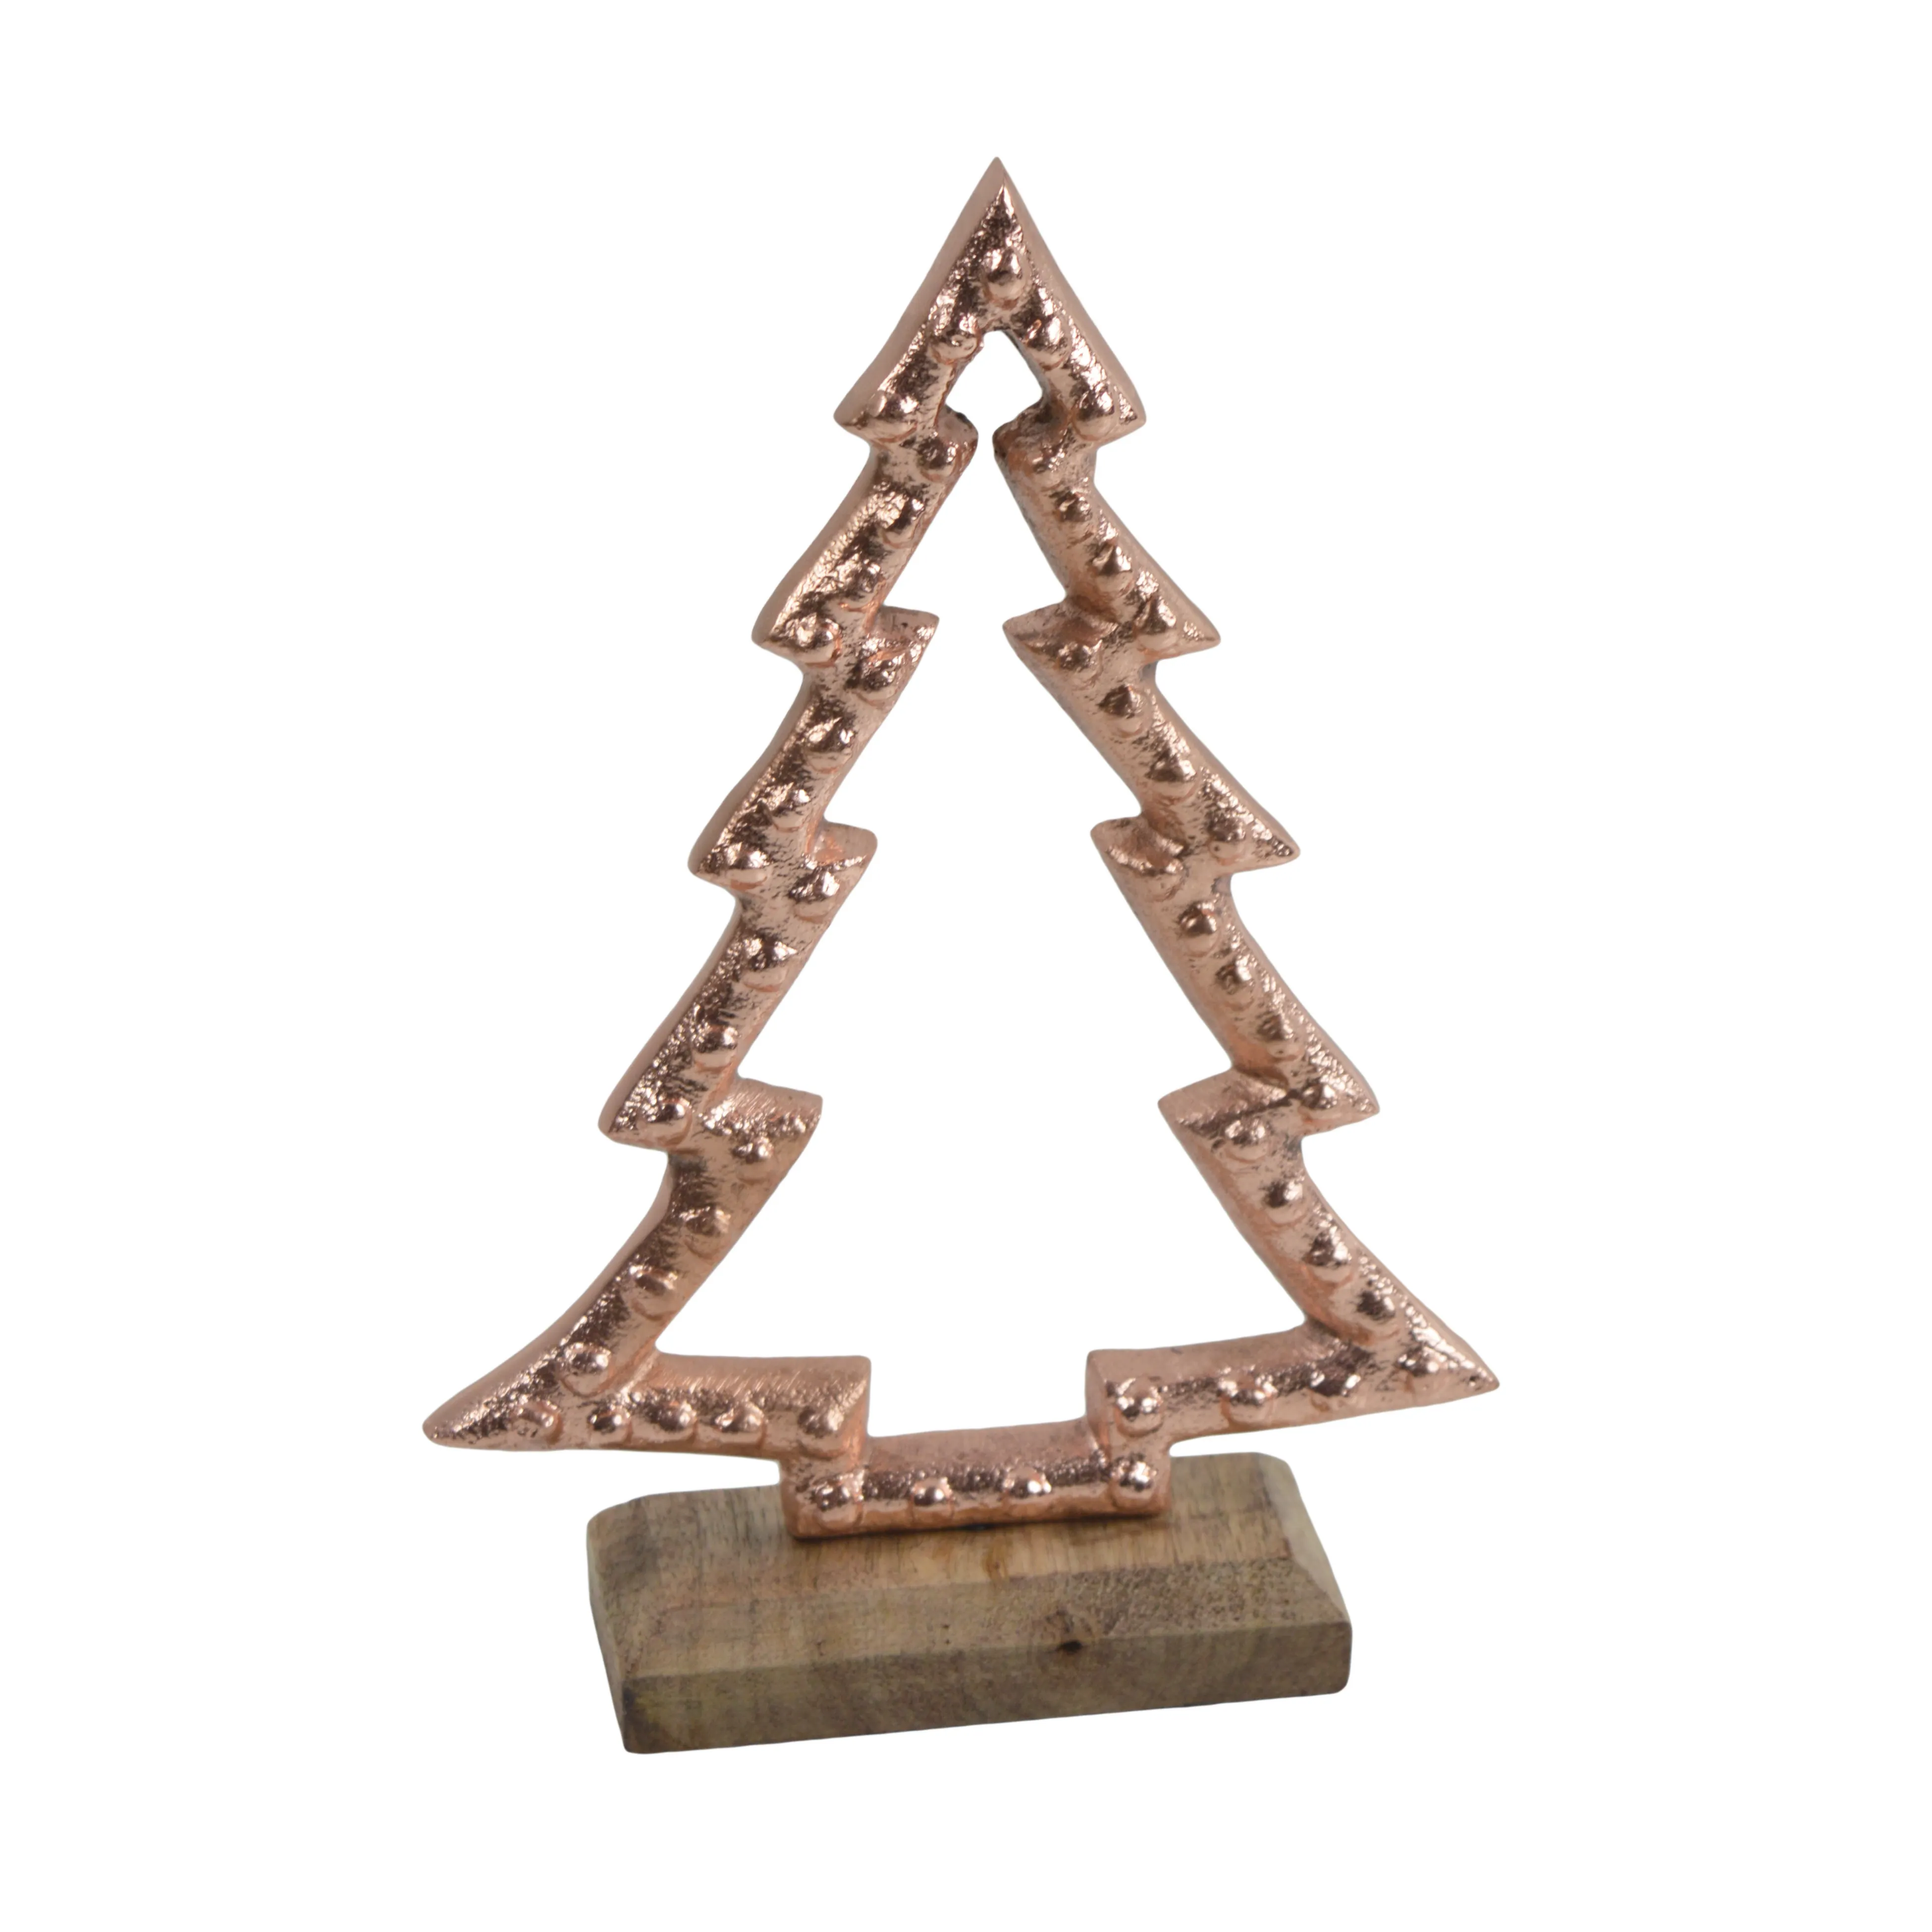 Wholeselling Merry Christmas tree Copper Plated With Brown Wooden Based For Party Ornament For Christmas And Home Decor Metal